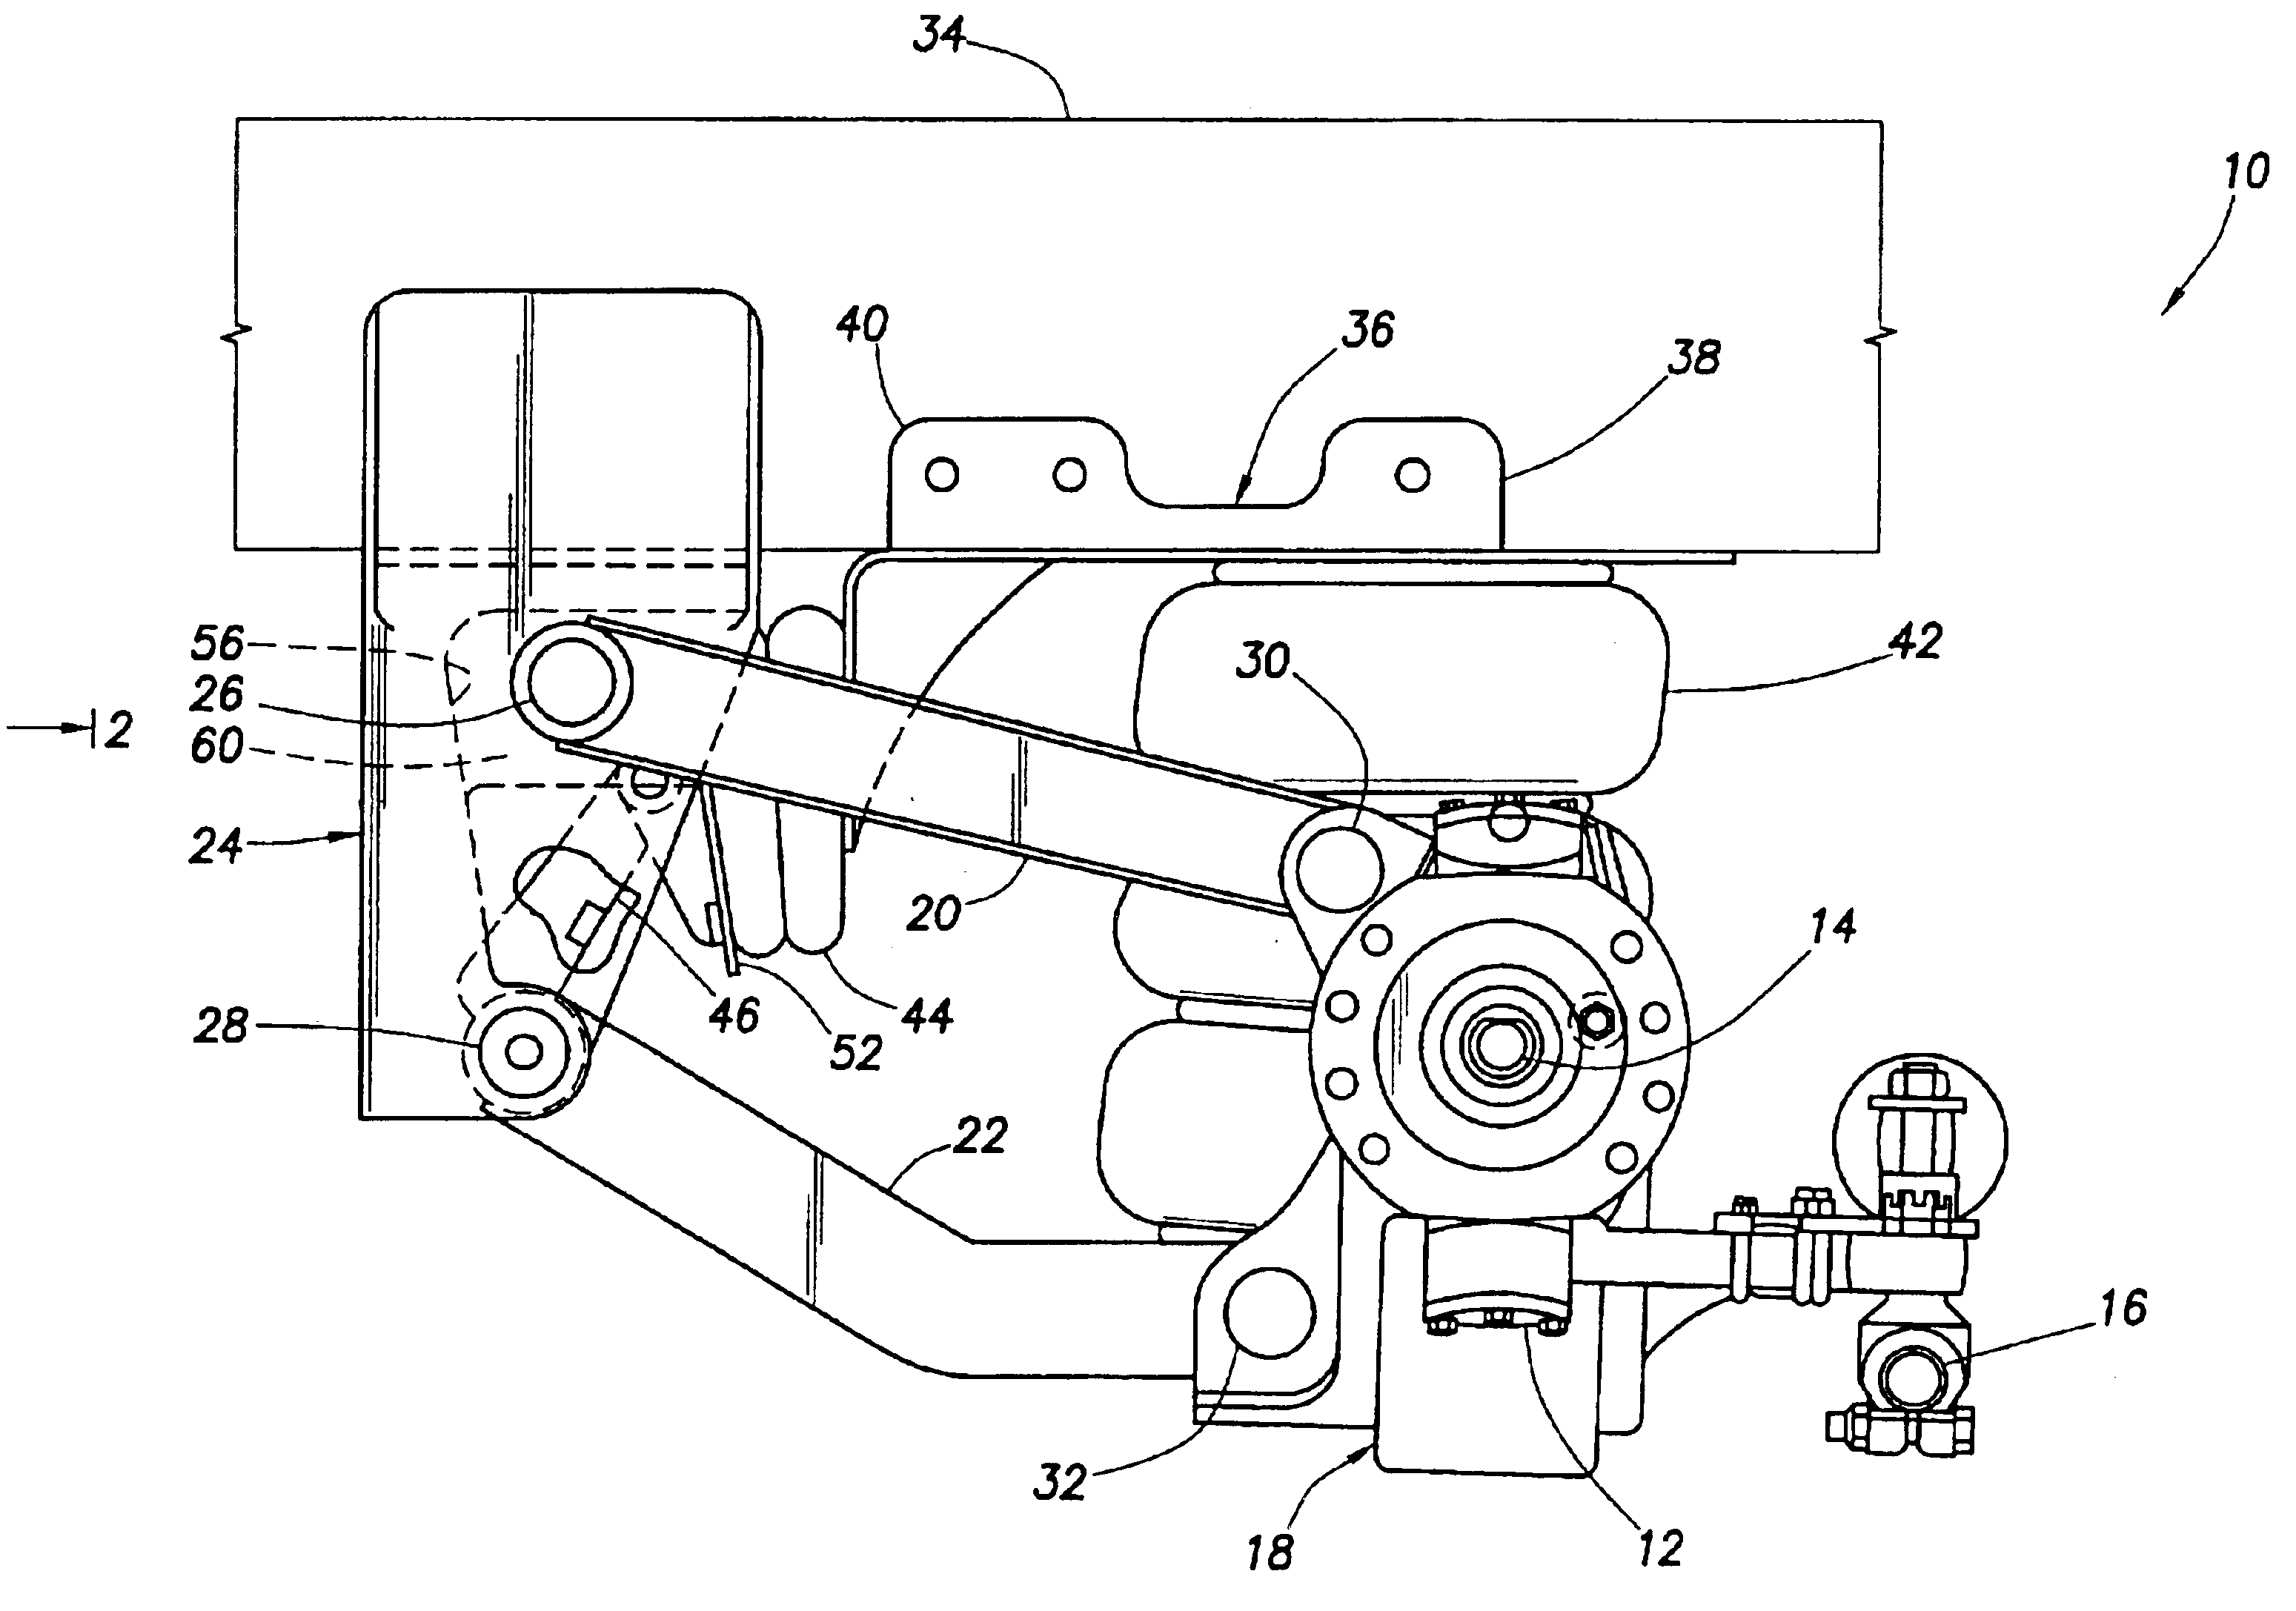 Lift axle suspension system